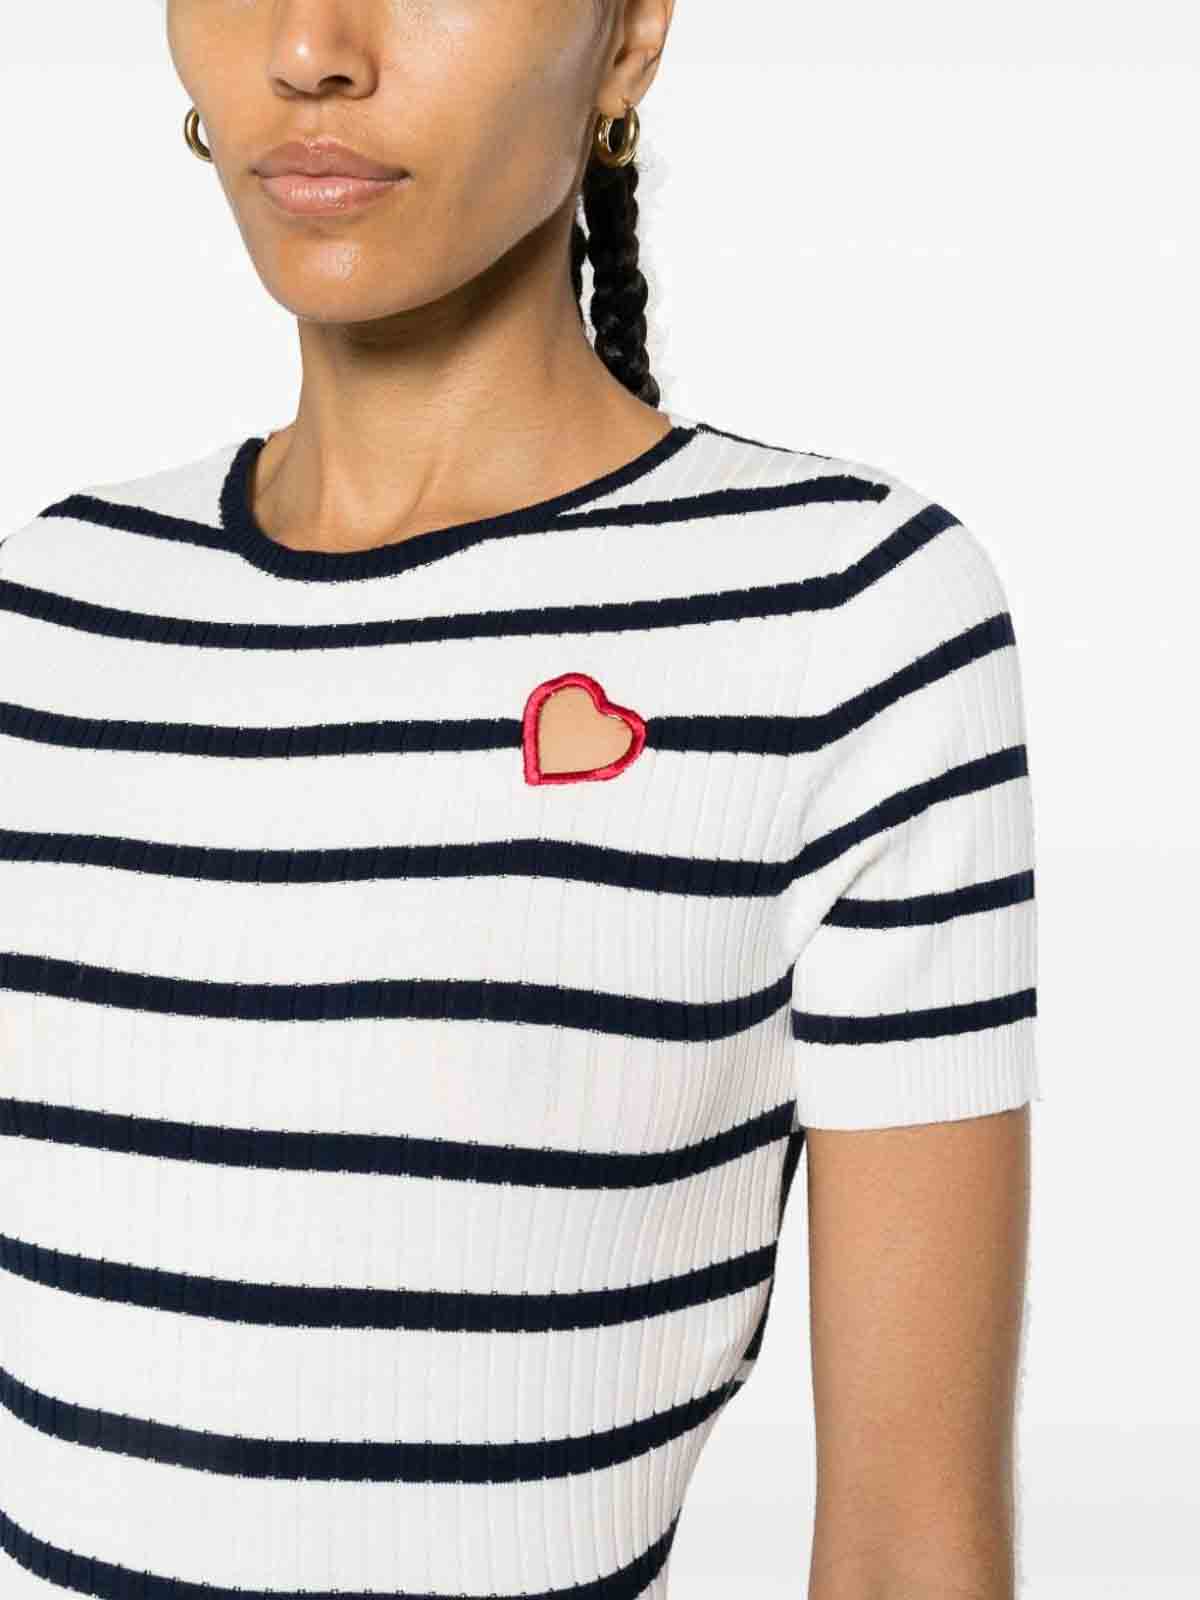 Shop Twinset Striped T-shirt In White